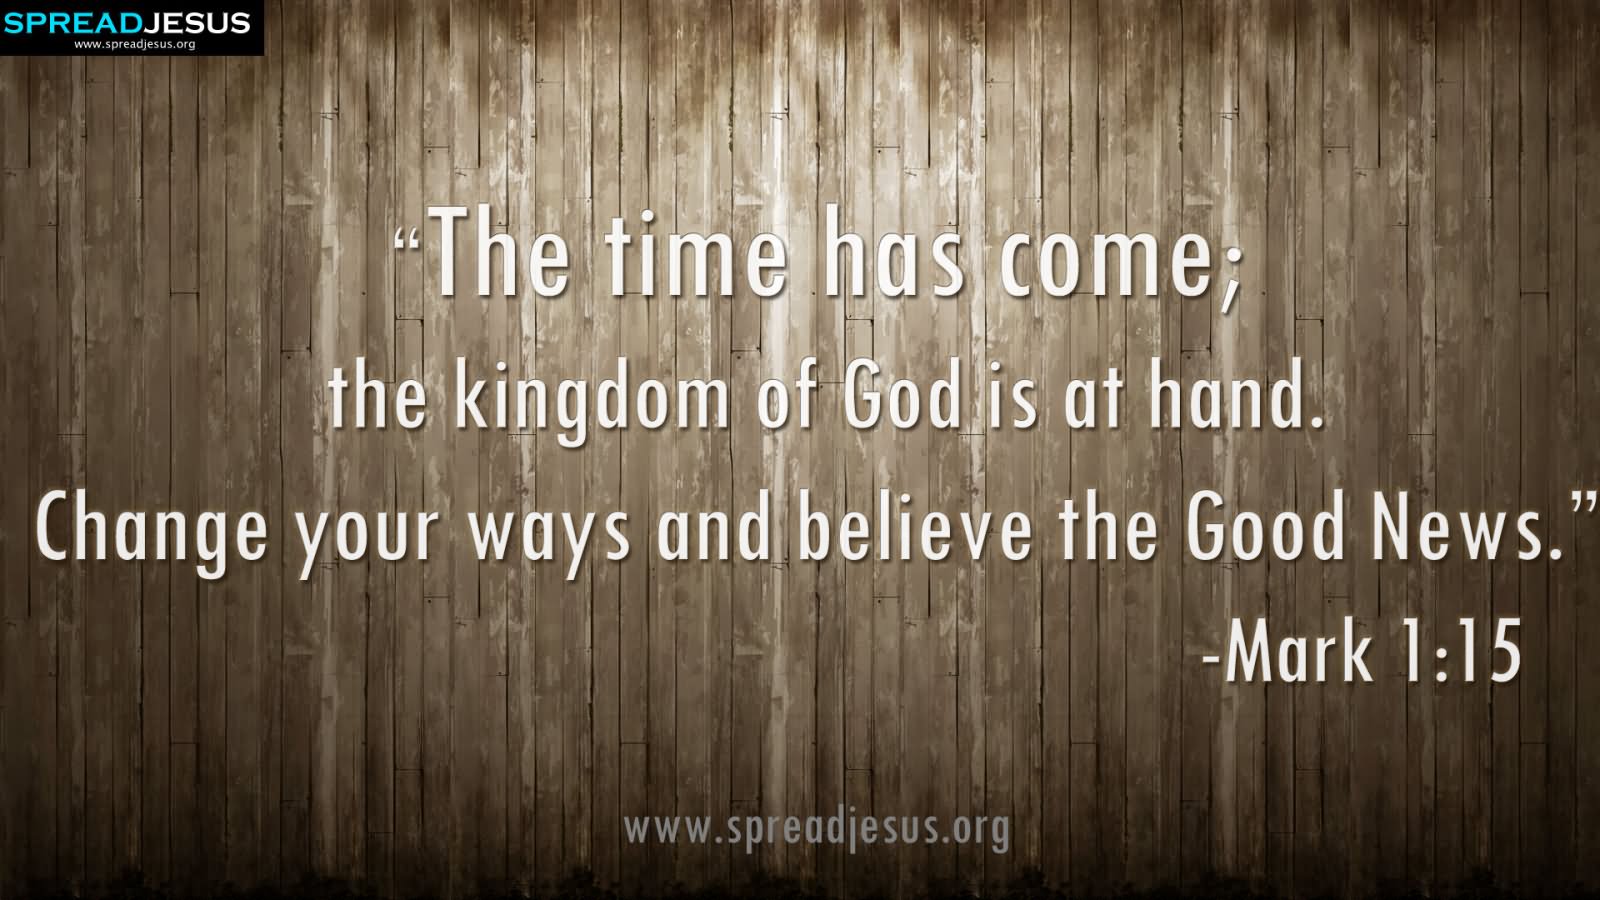 The time has come, The kingdom of God is at hand, Change your ways and believe the good news.